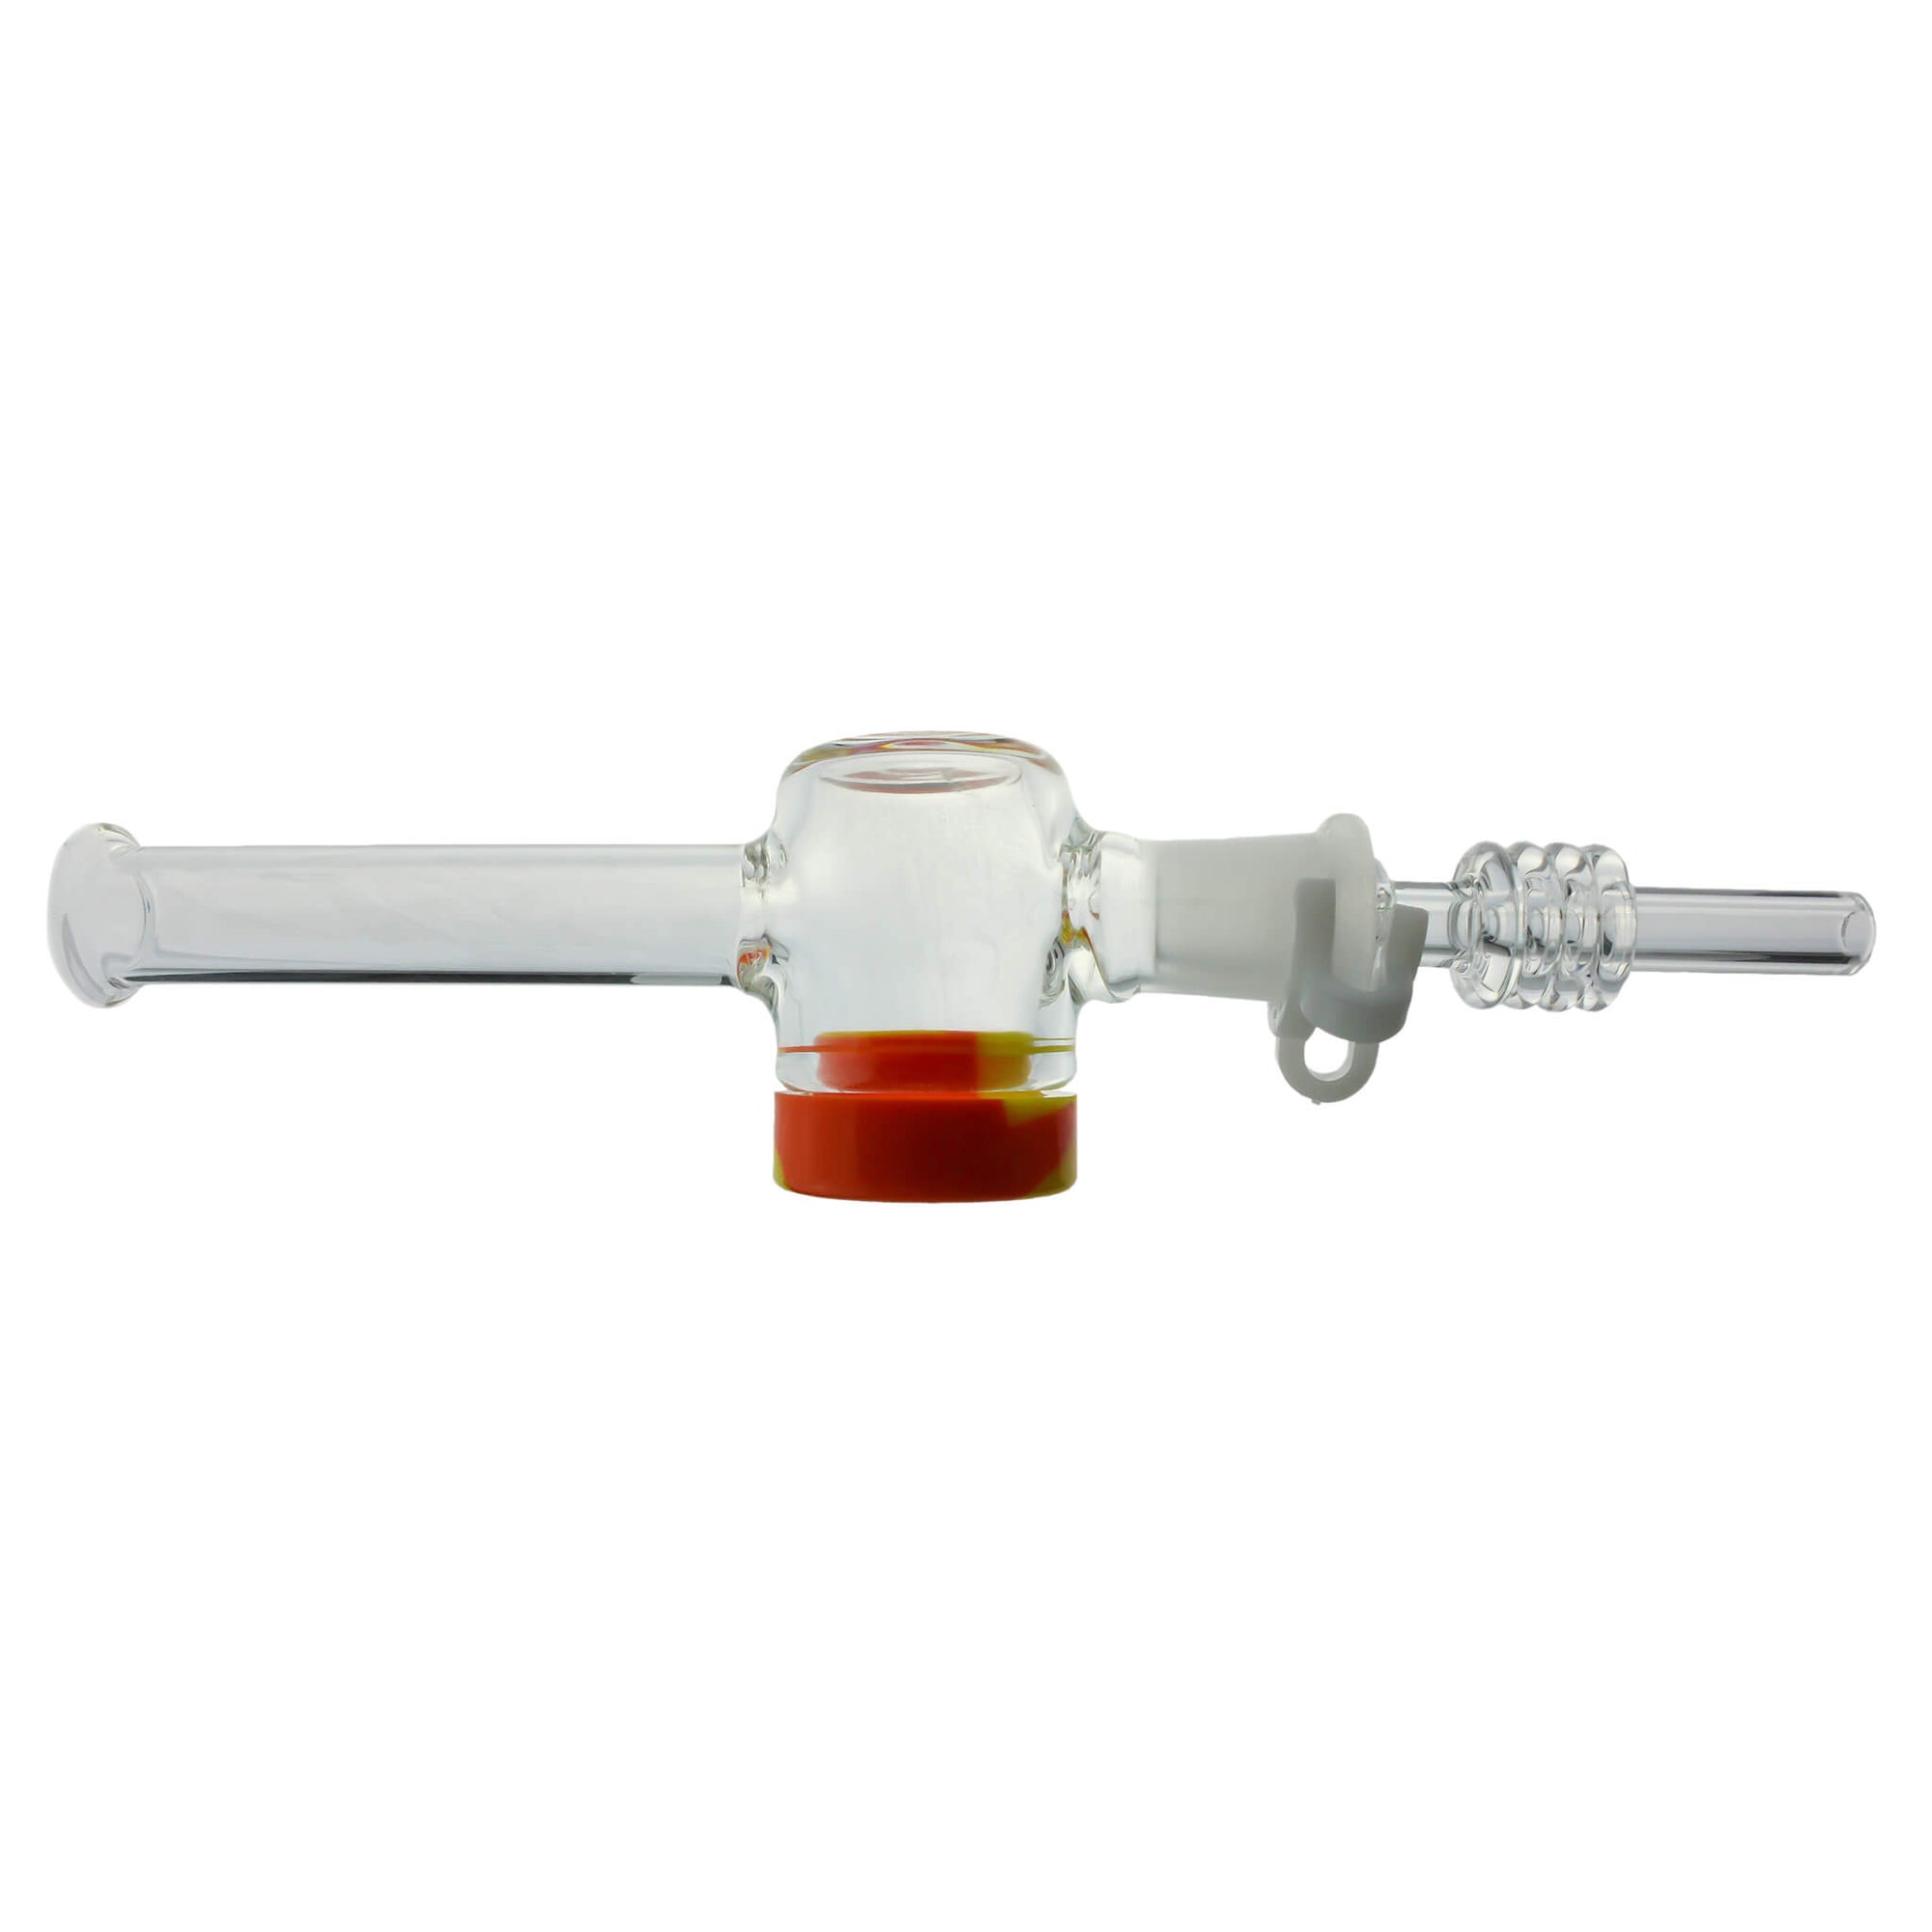 Glass Nectar Collector Kits | Horizontal View | the dabbing specialists